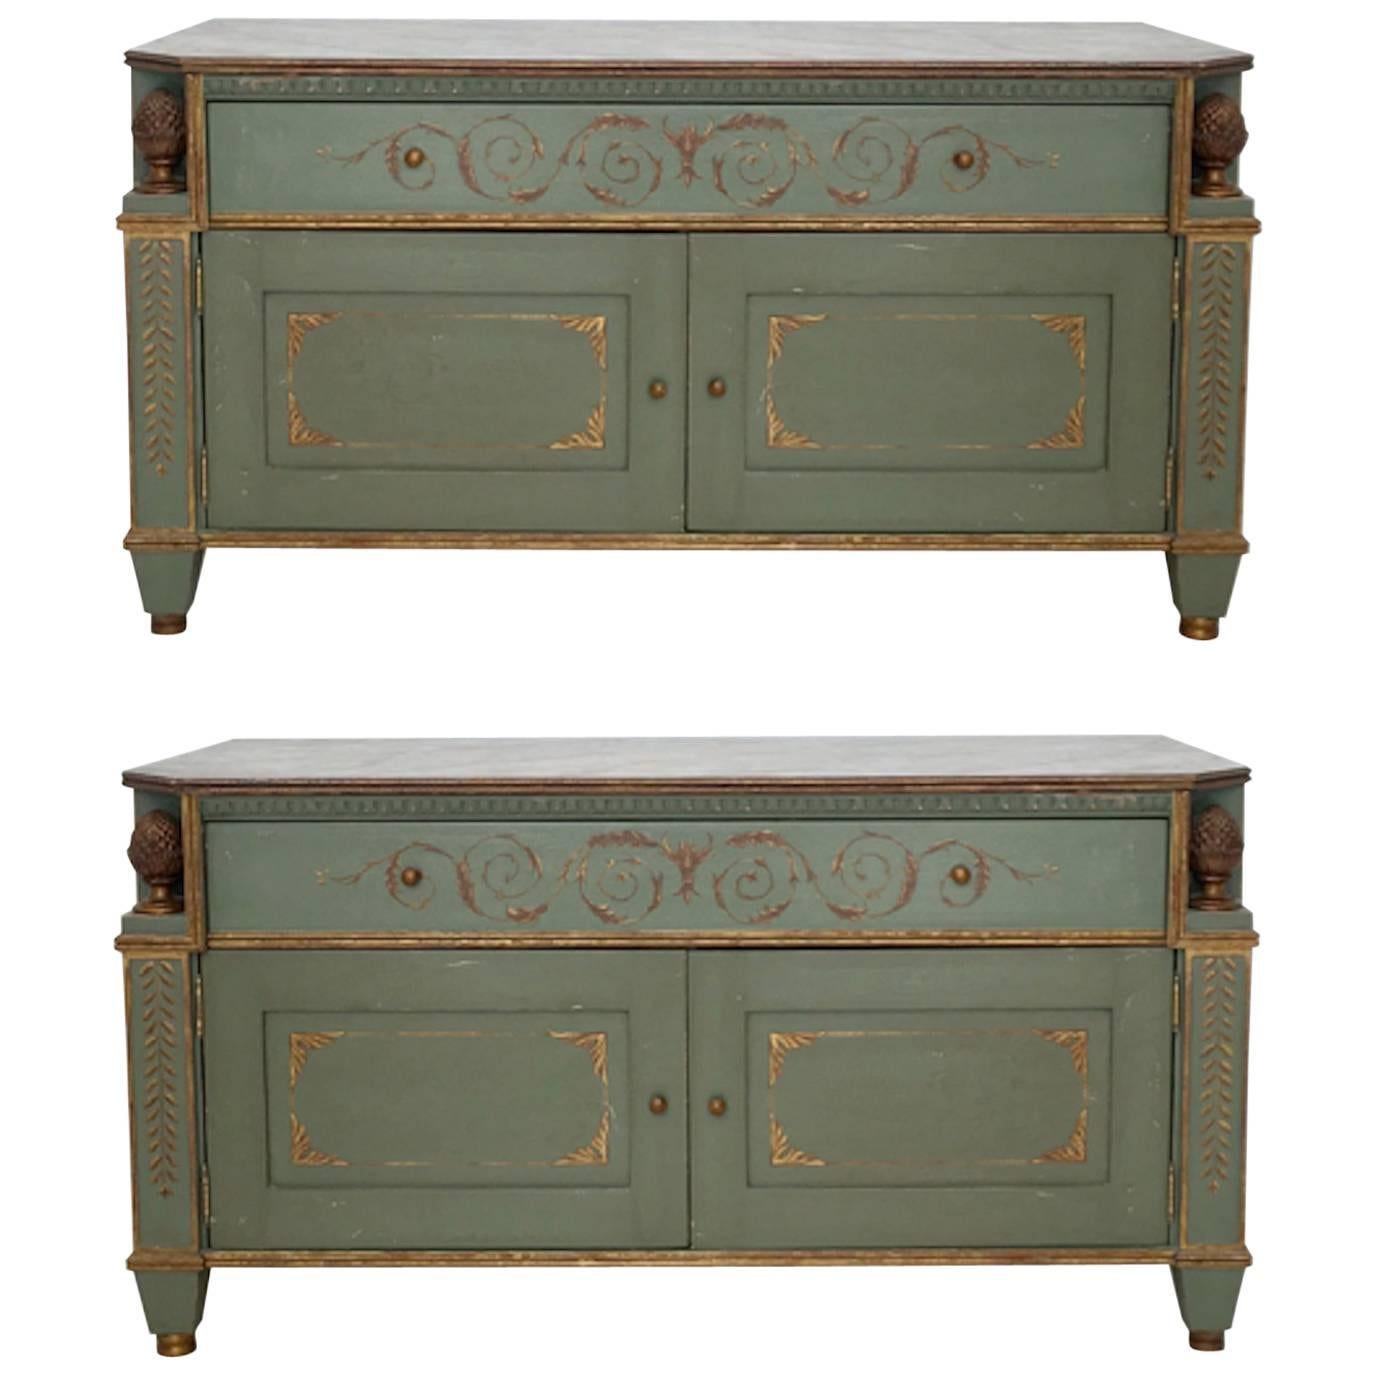 Pair of Neoclassical Style Painted Commodes